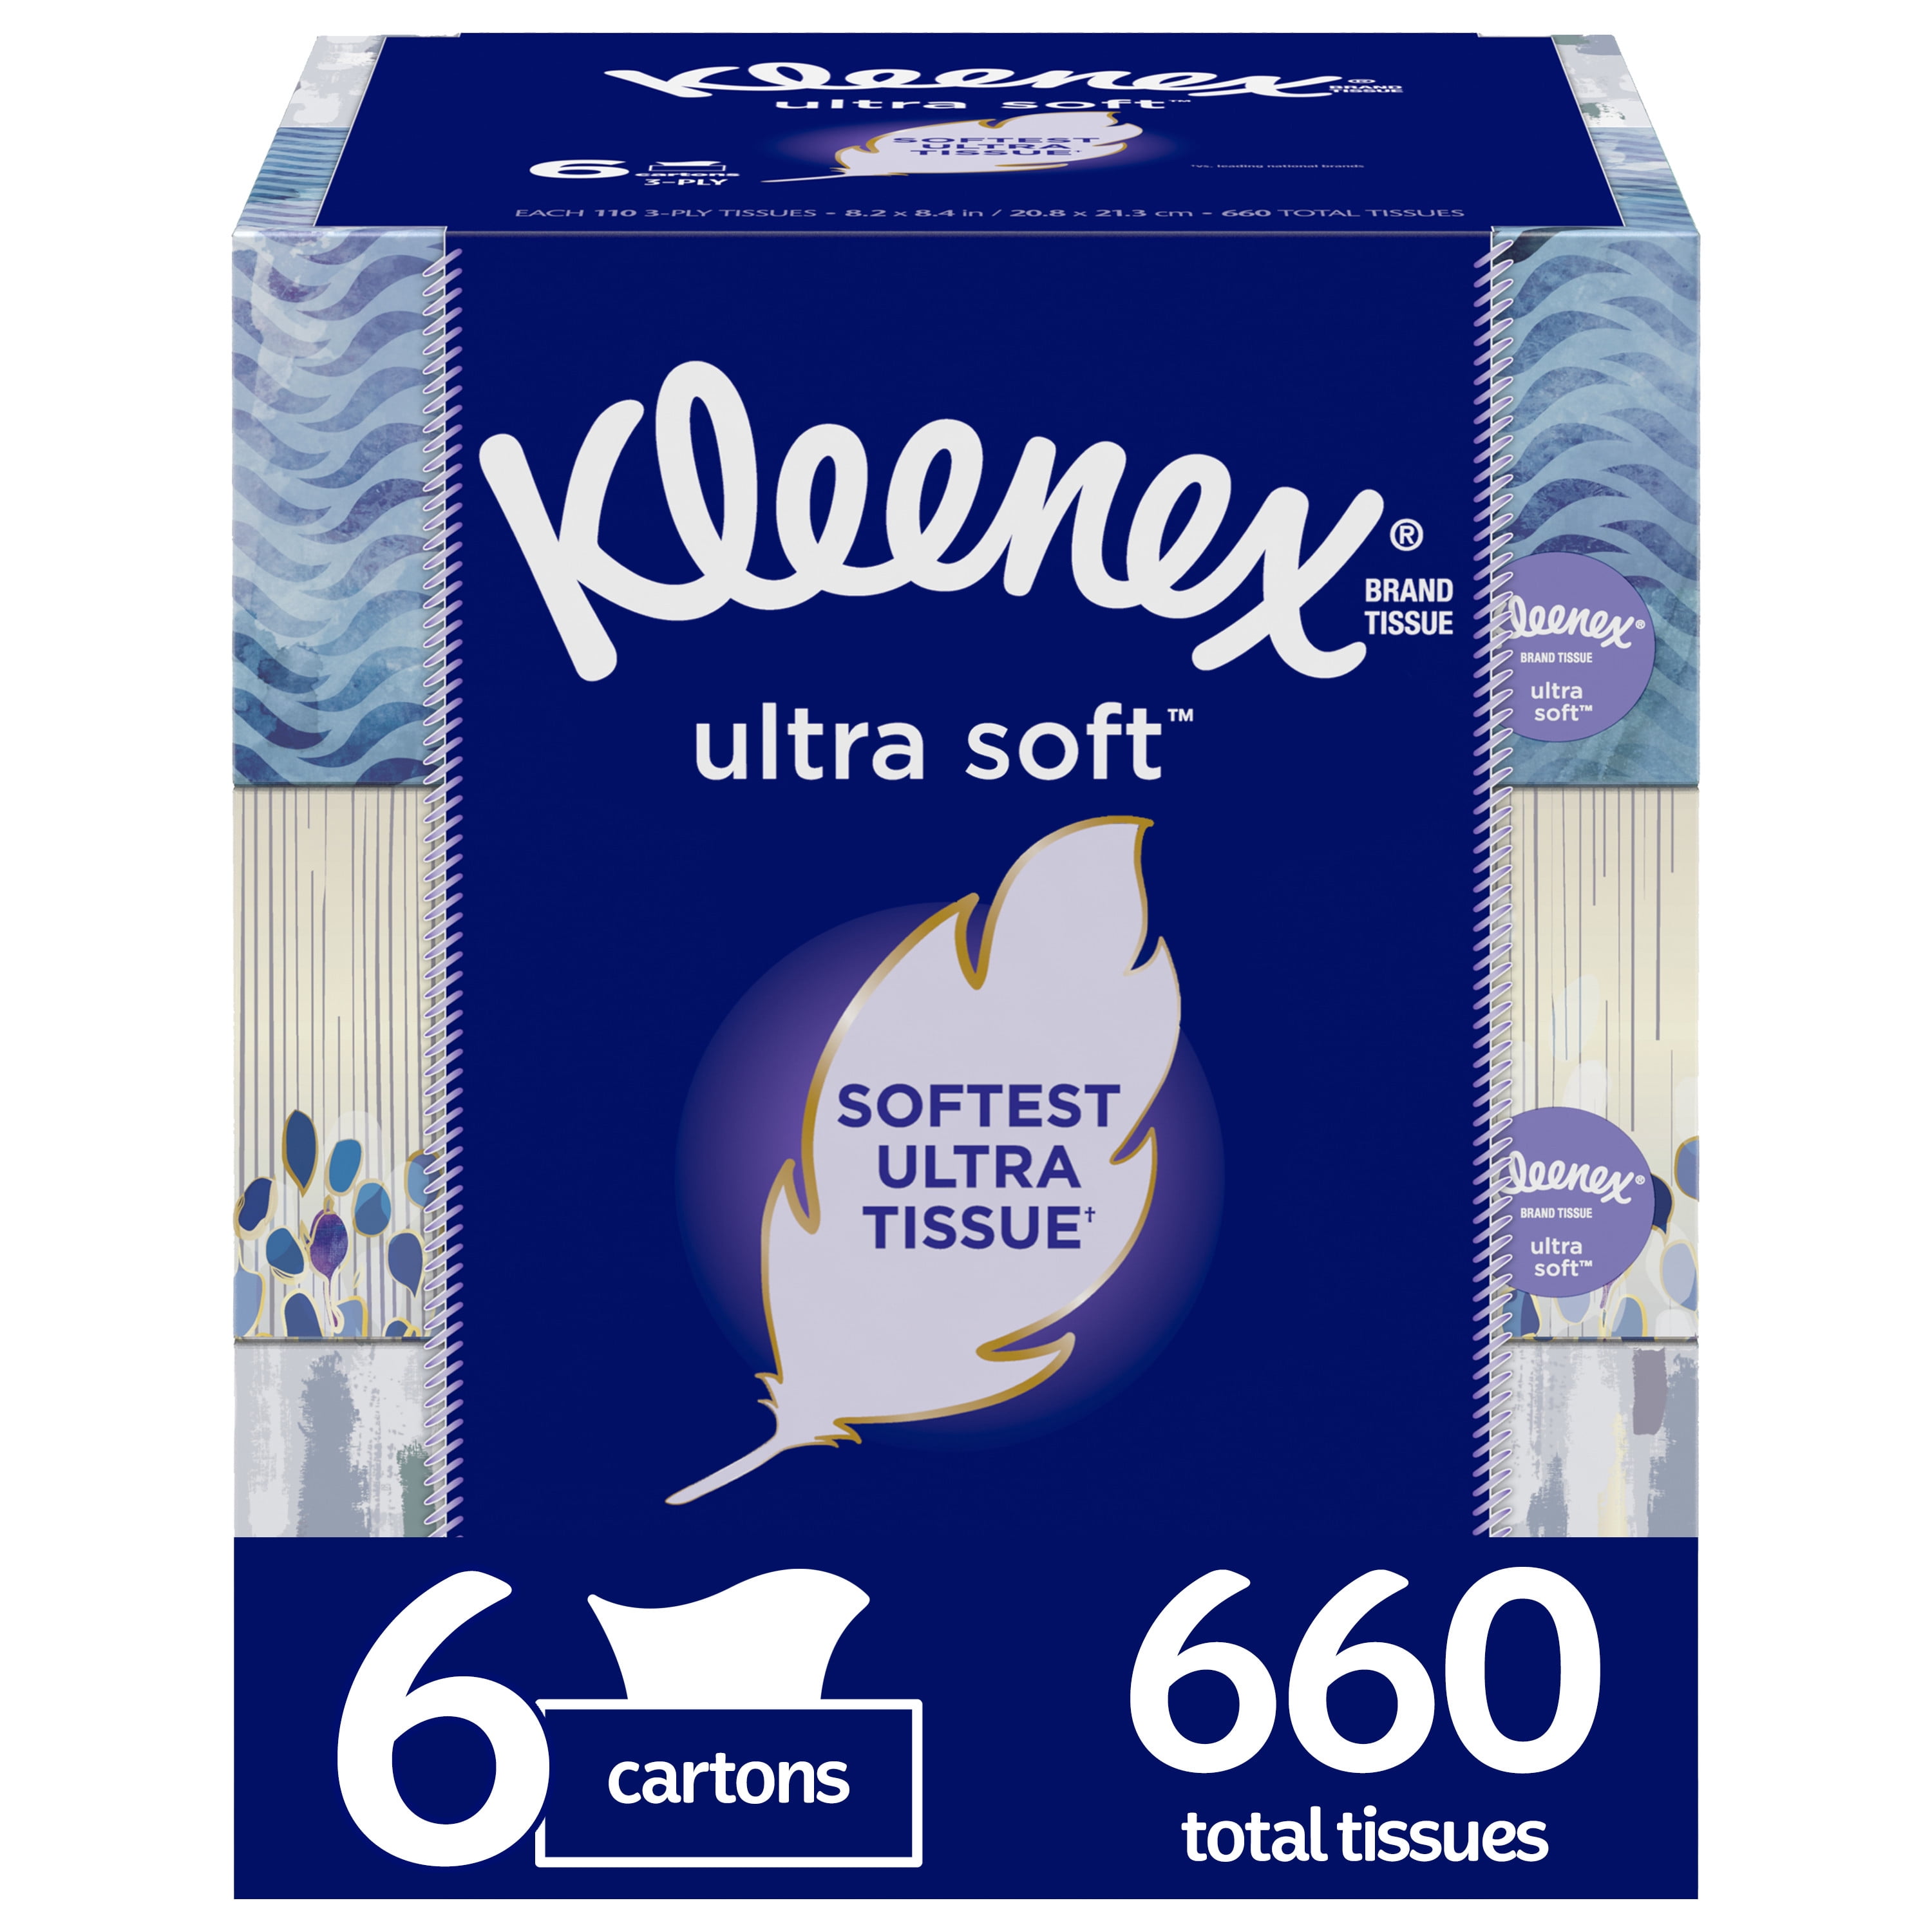 6 Pack Of Kleenex Everyday 144 Tissues Per Flat Box Facial Tissues Paper 